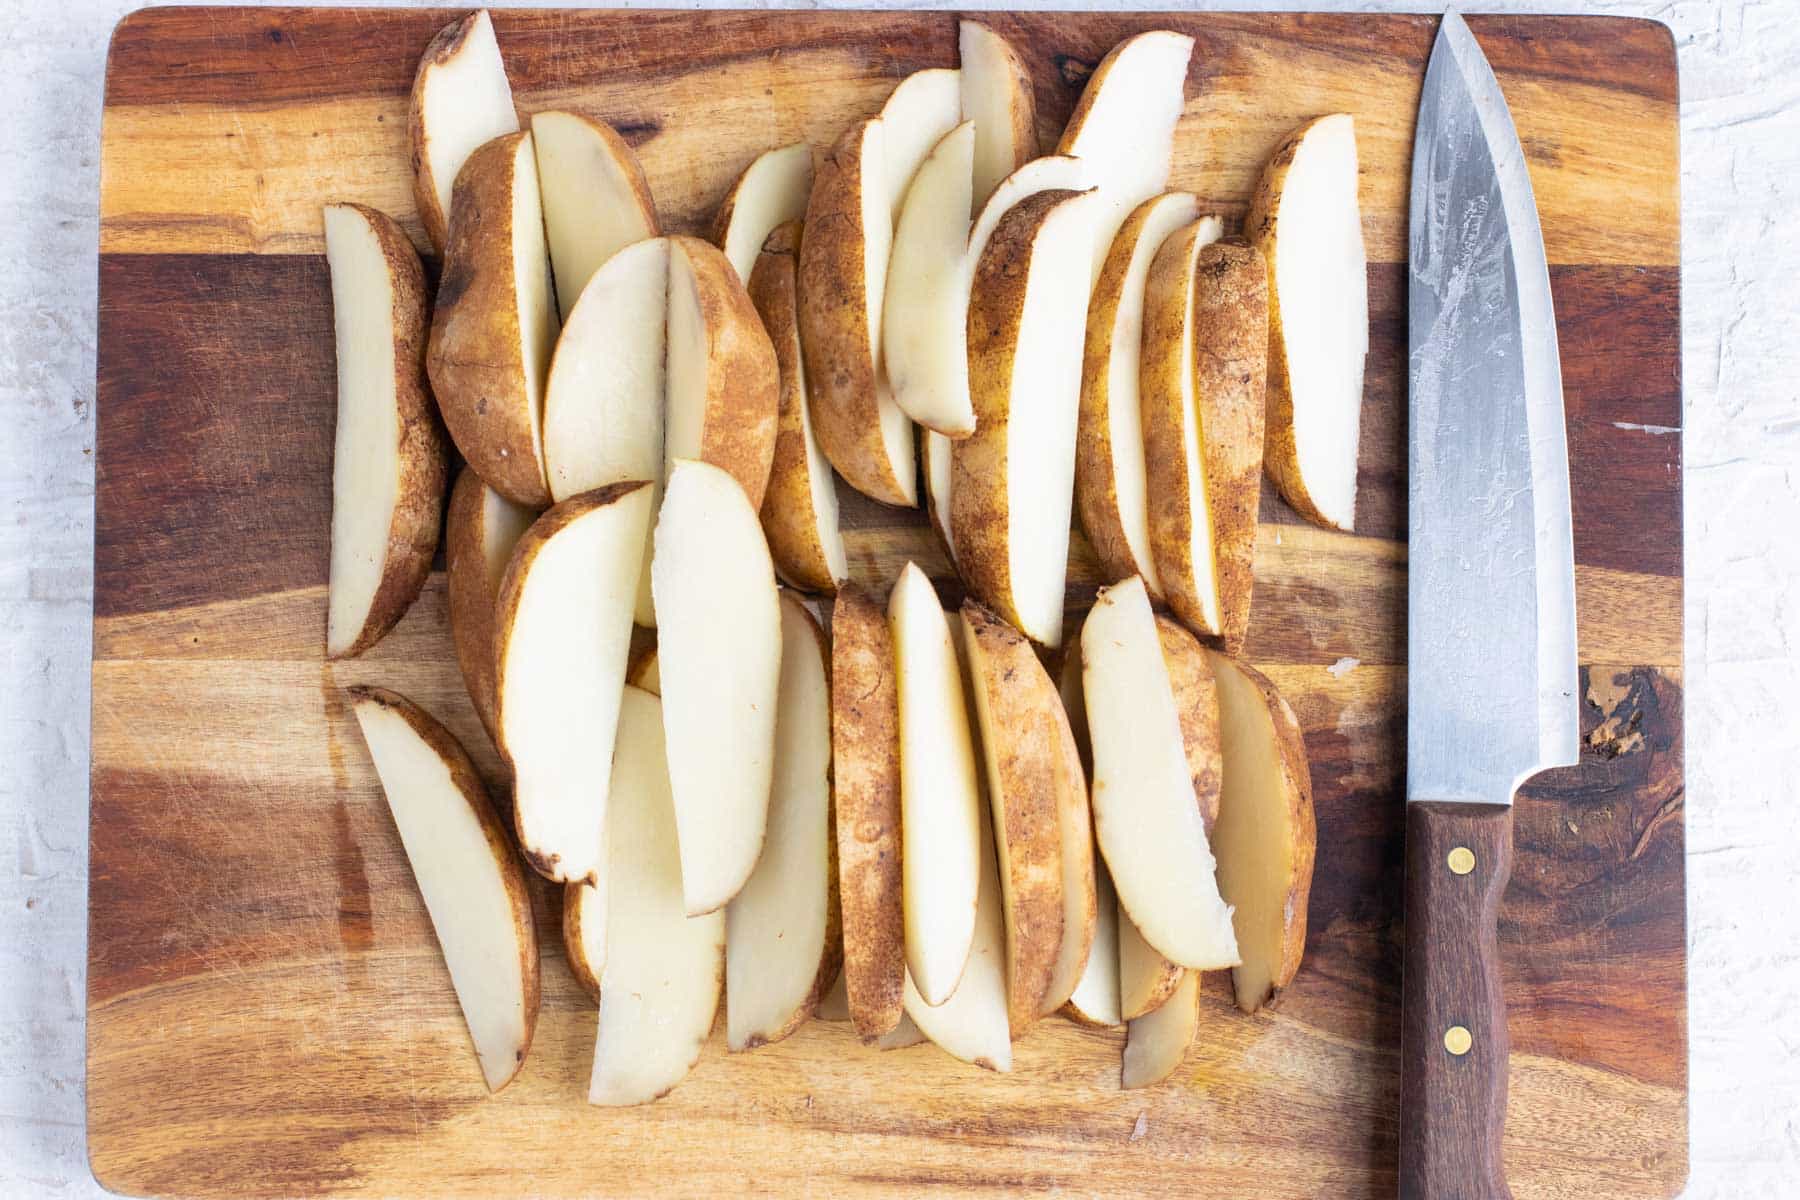 Potatoes are sliced into wedges on a cutting board.